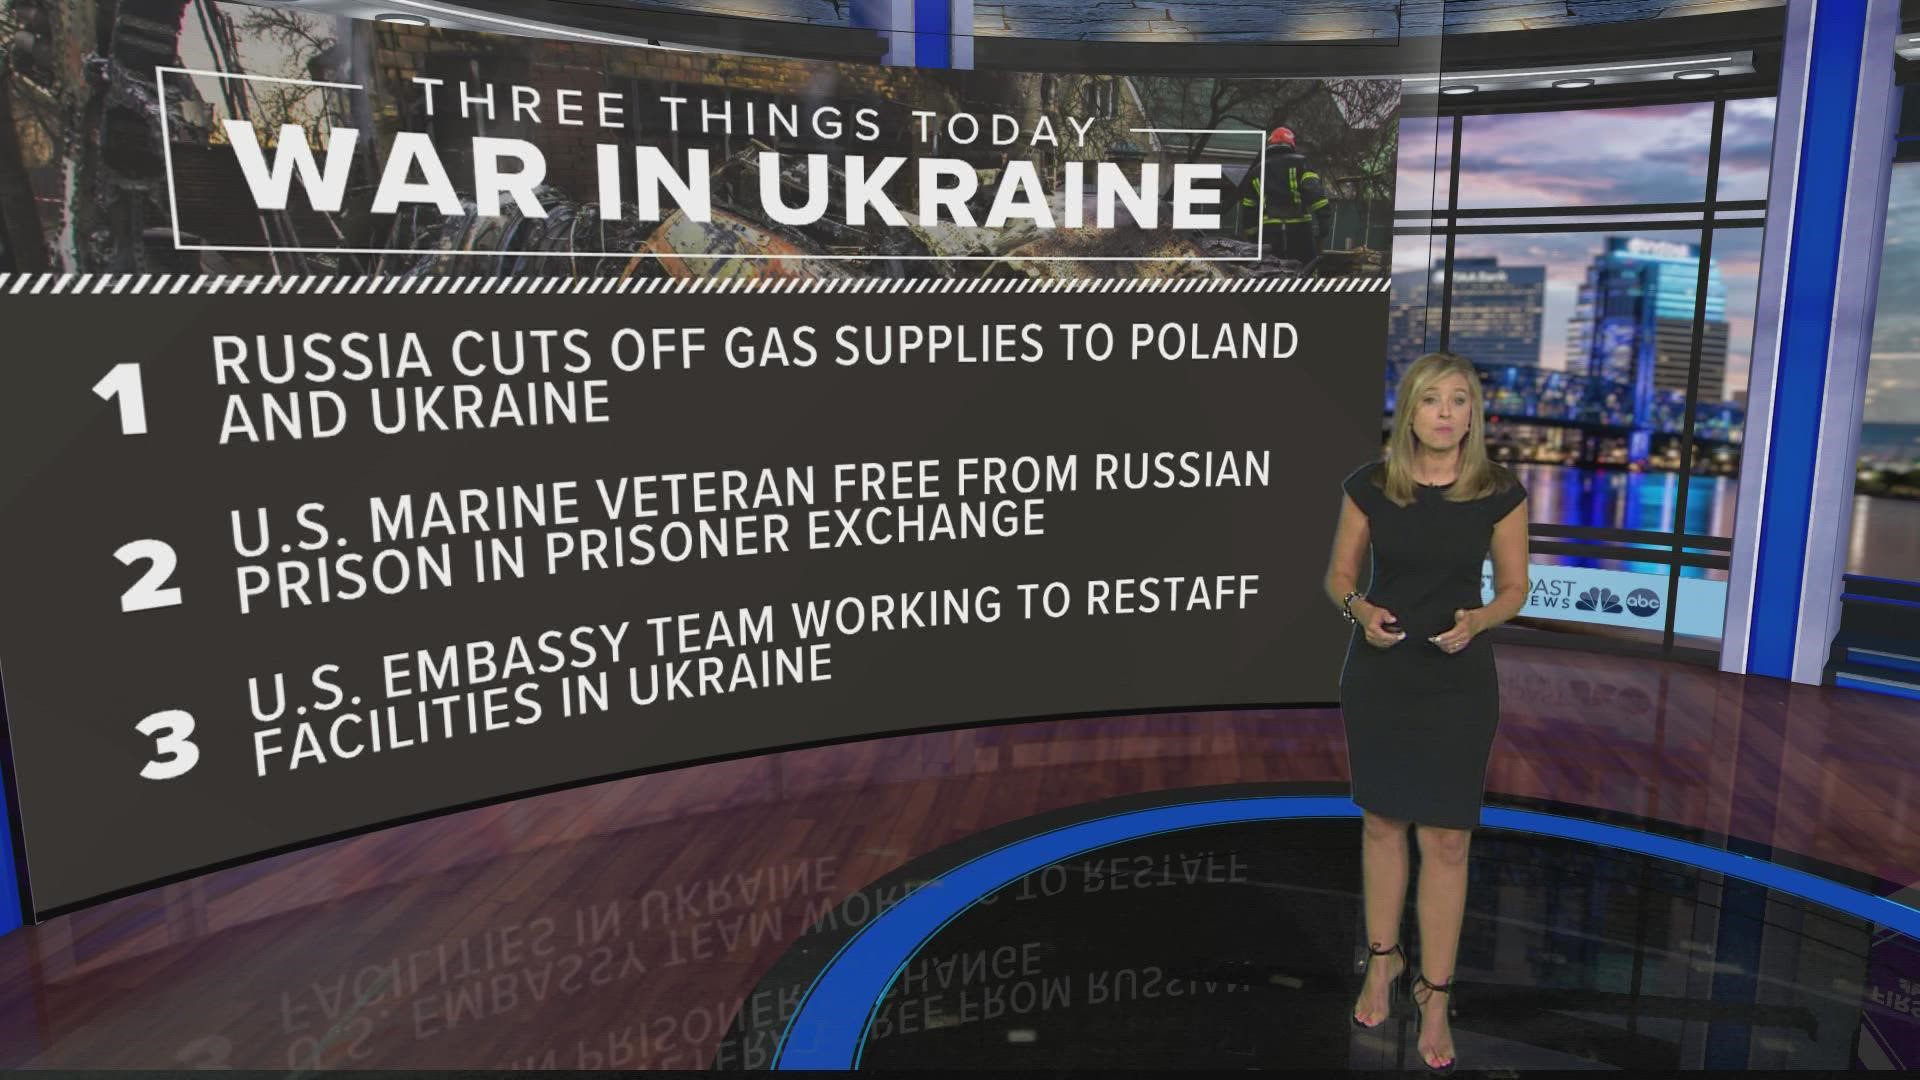 Here are the latest headlines out of Ukraine.